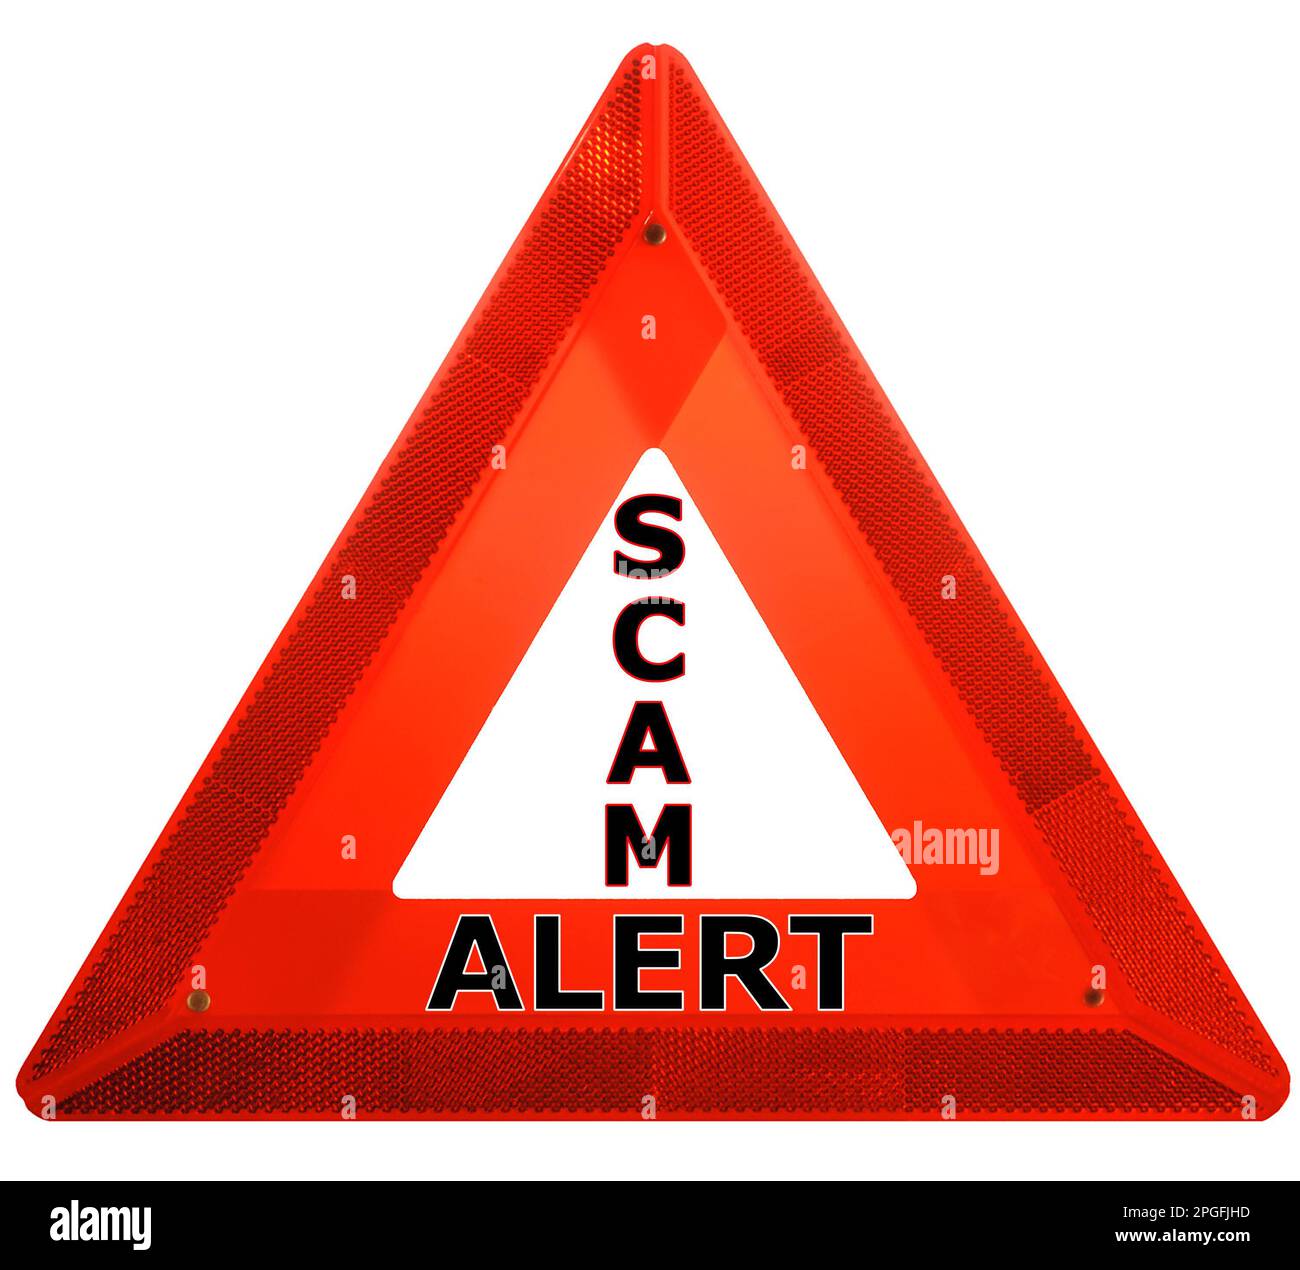 A red reflective caution triangle indicating SCAM ALERT. Can suggest risk of a deceptive scheme to get money from unsuspecting or gullible victims. Stock Photo